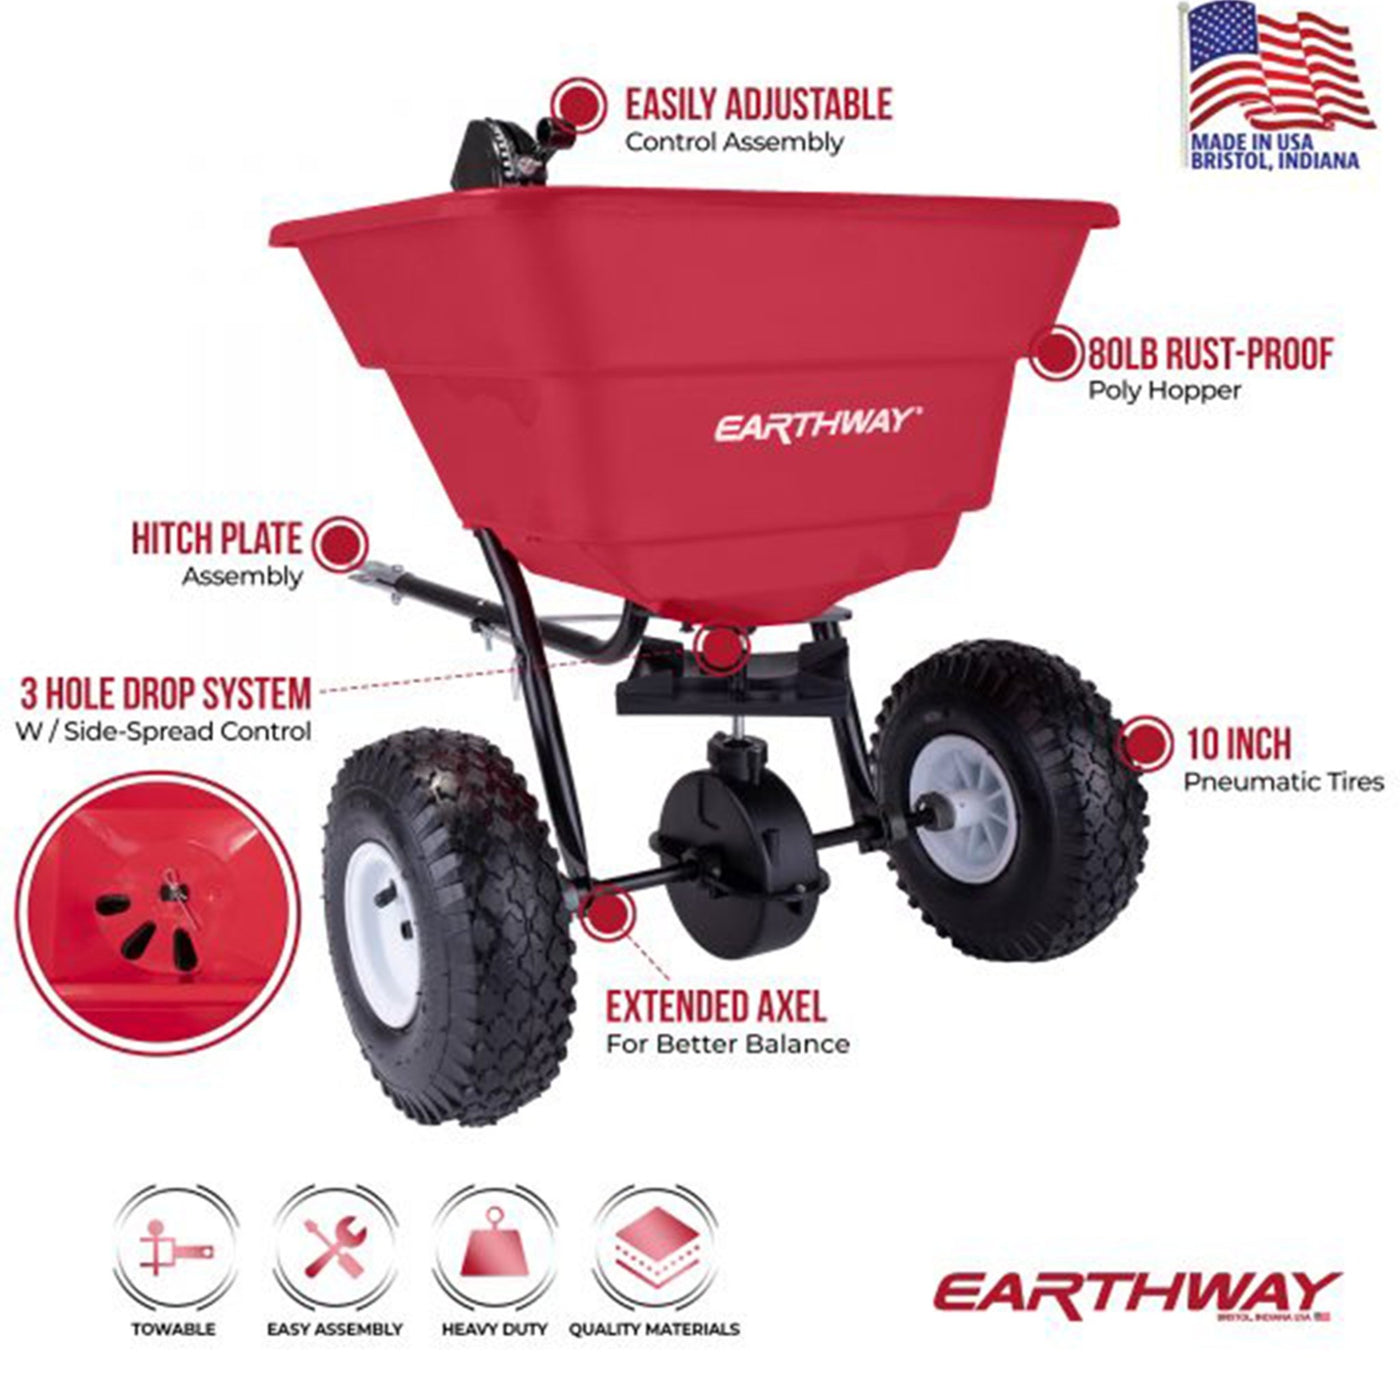 Earthway broadcast tow behind seed & fertiliser spreader 36kg - Solo New Zealand